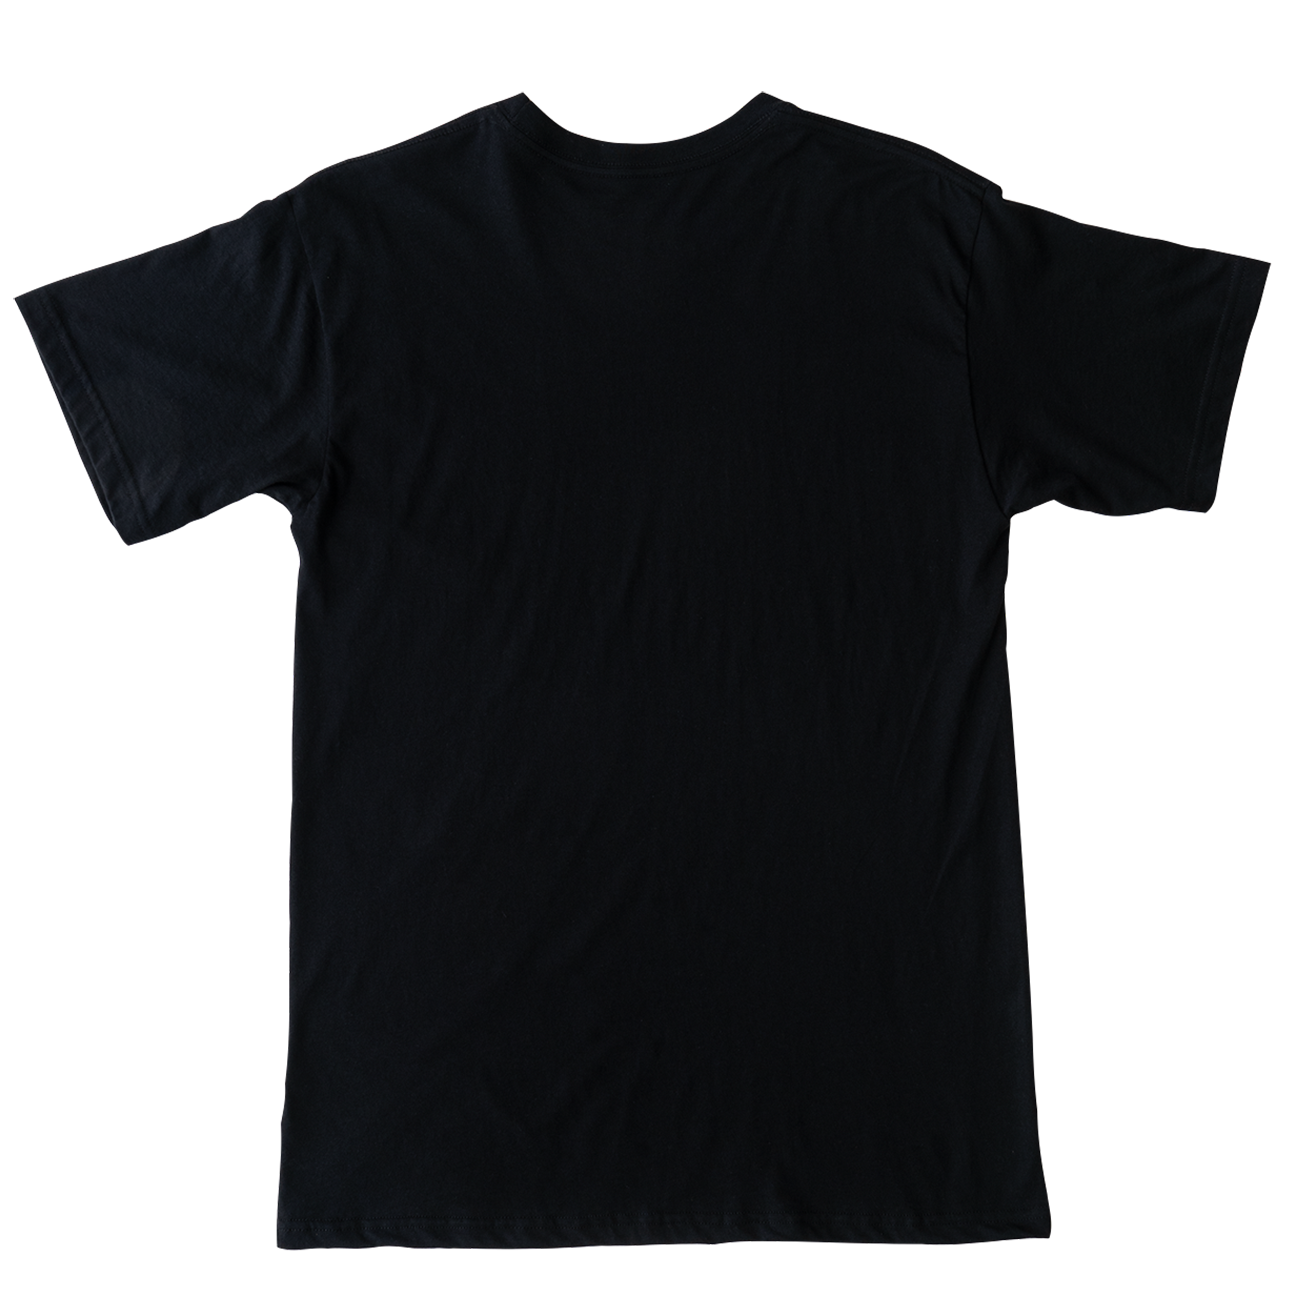 Nature Backs Short Sleeve 100% Organic Cotton T-Shirt | Minimalist Black Short Sleeve made with Eco-Friendly Fibers Sustainably made in the USA 